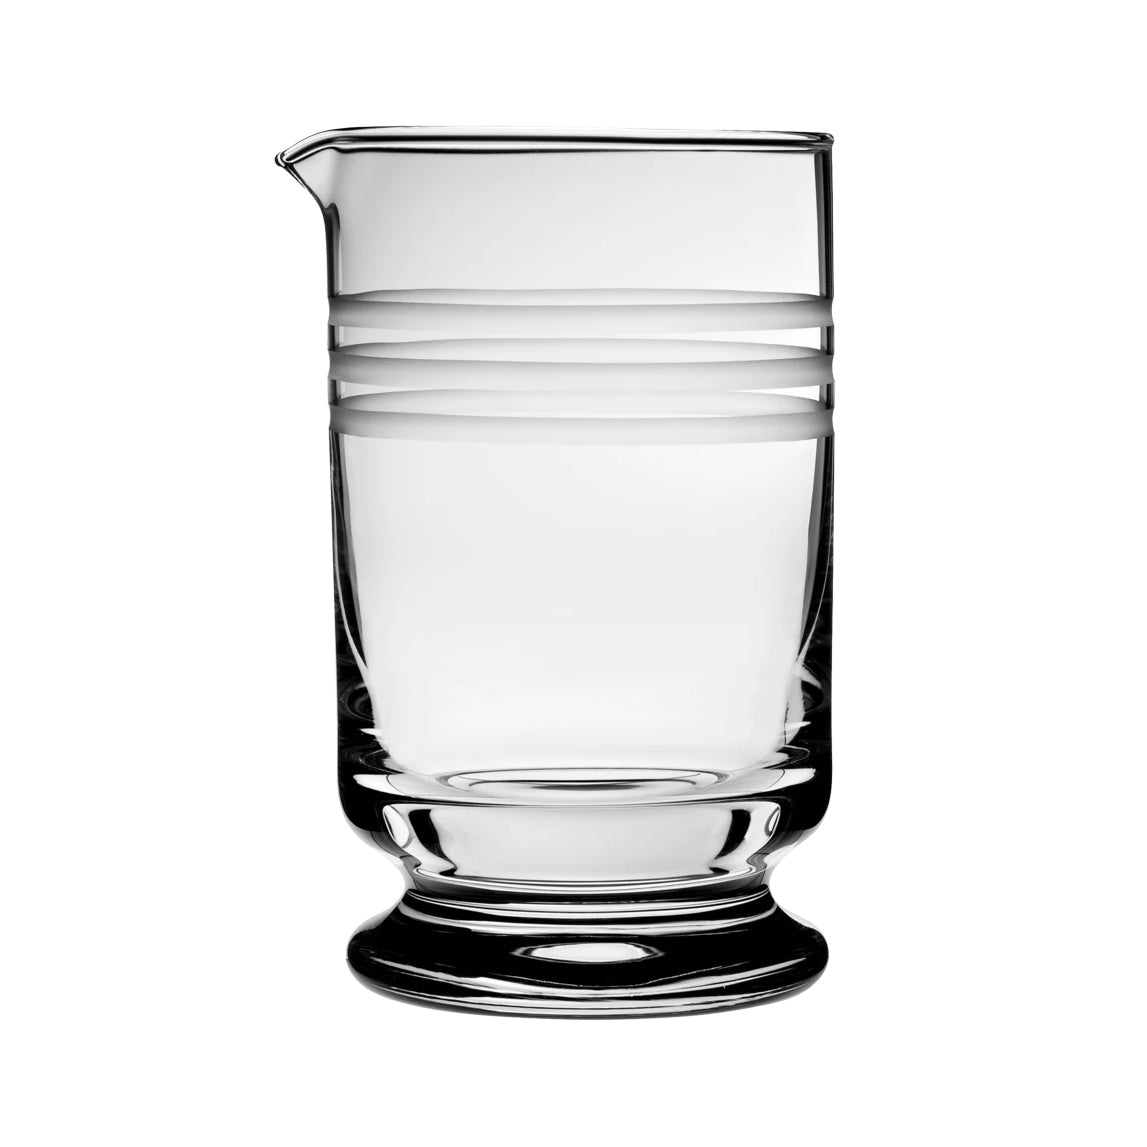 Calabrese Etched Mixing Glass